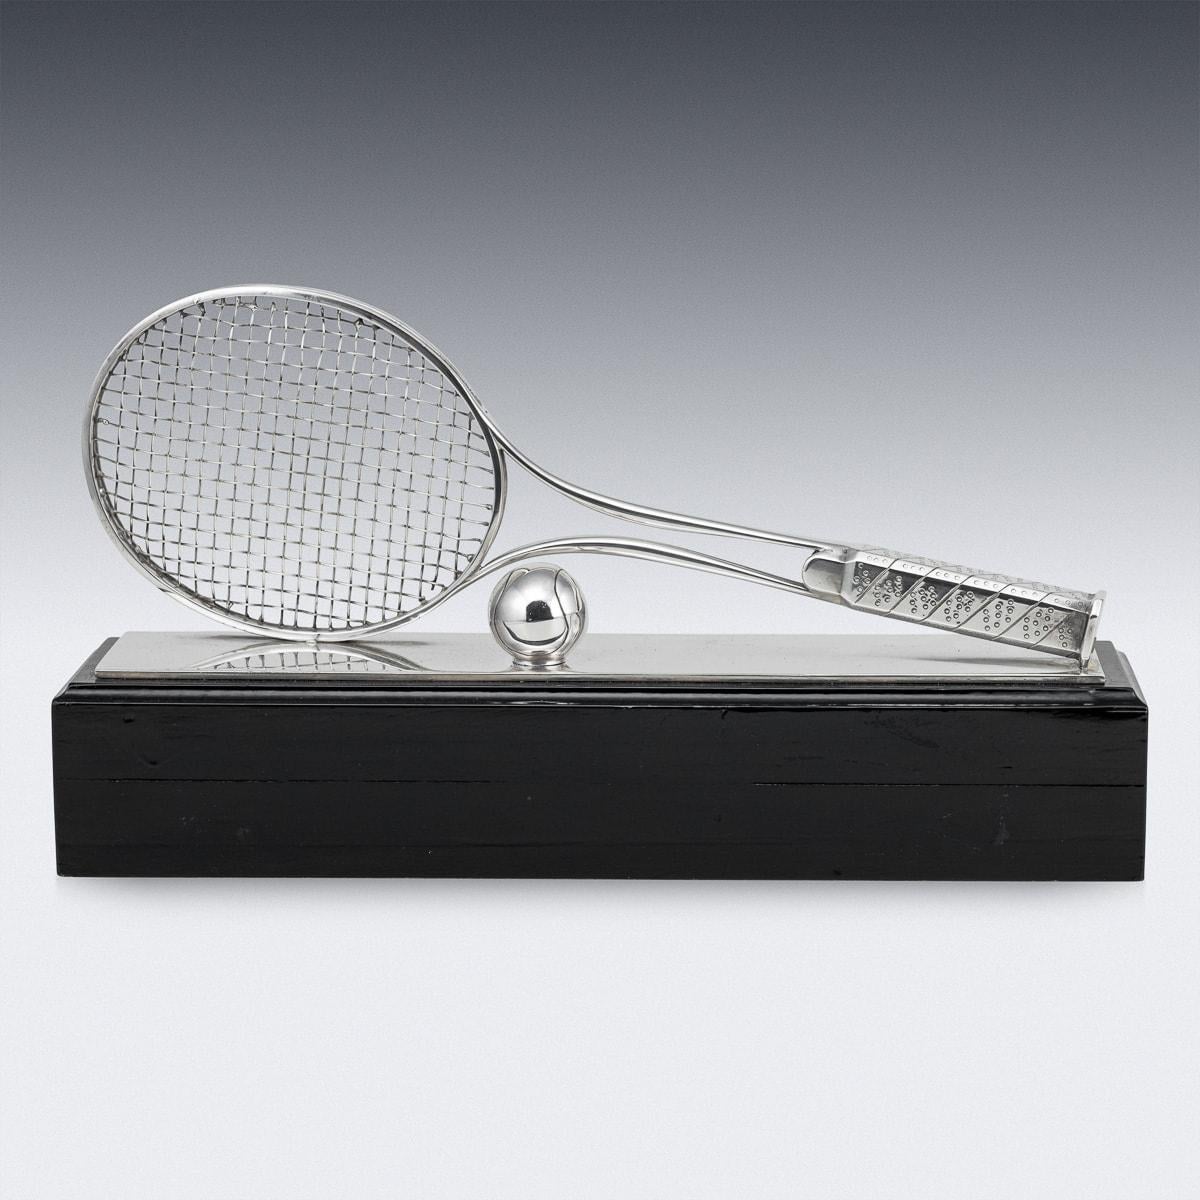 Vintage 20th Century pair of English silver plated tennis trophies. Designed as a racquet and ball on top of an ebonised wooden stand, this pair of trophies would be a great winning prize for a doubles team or for a display case.

CONDITION
In Great